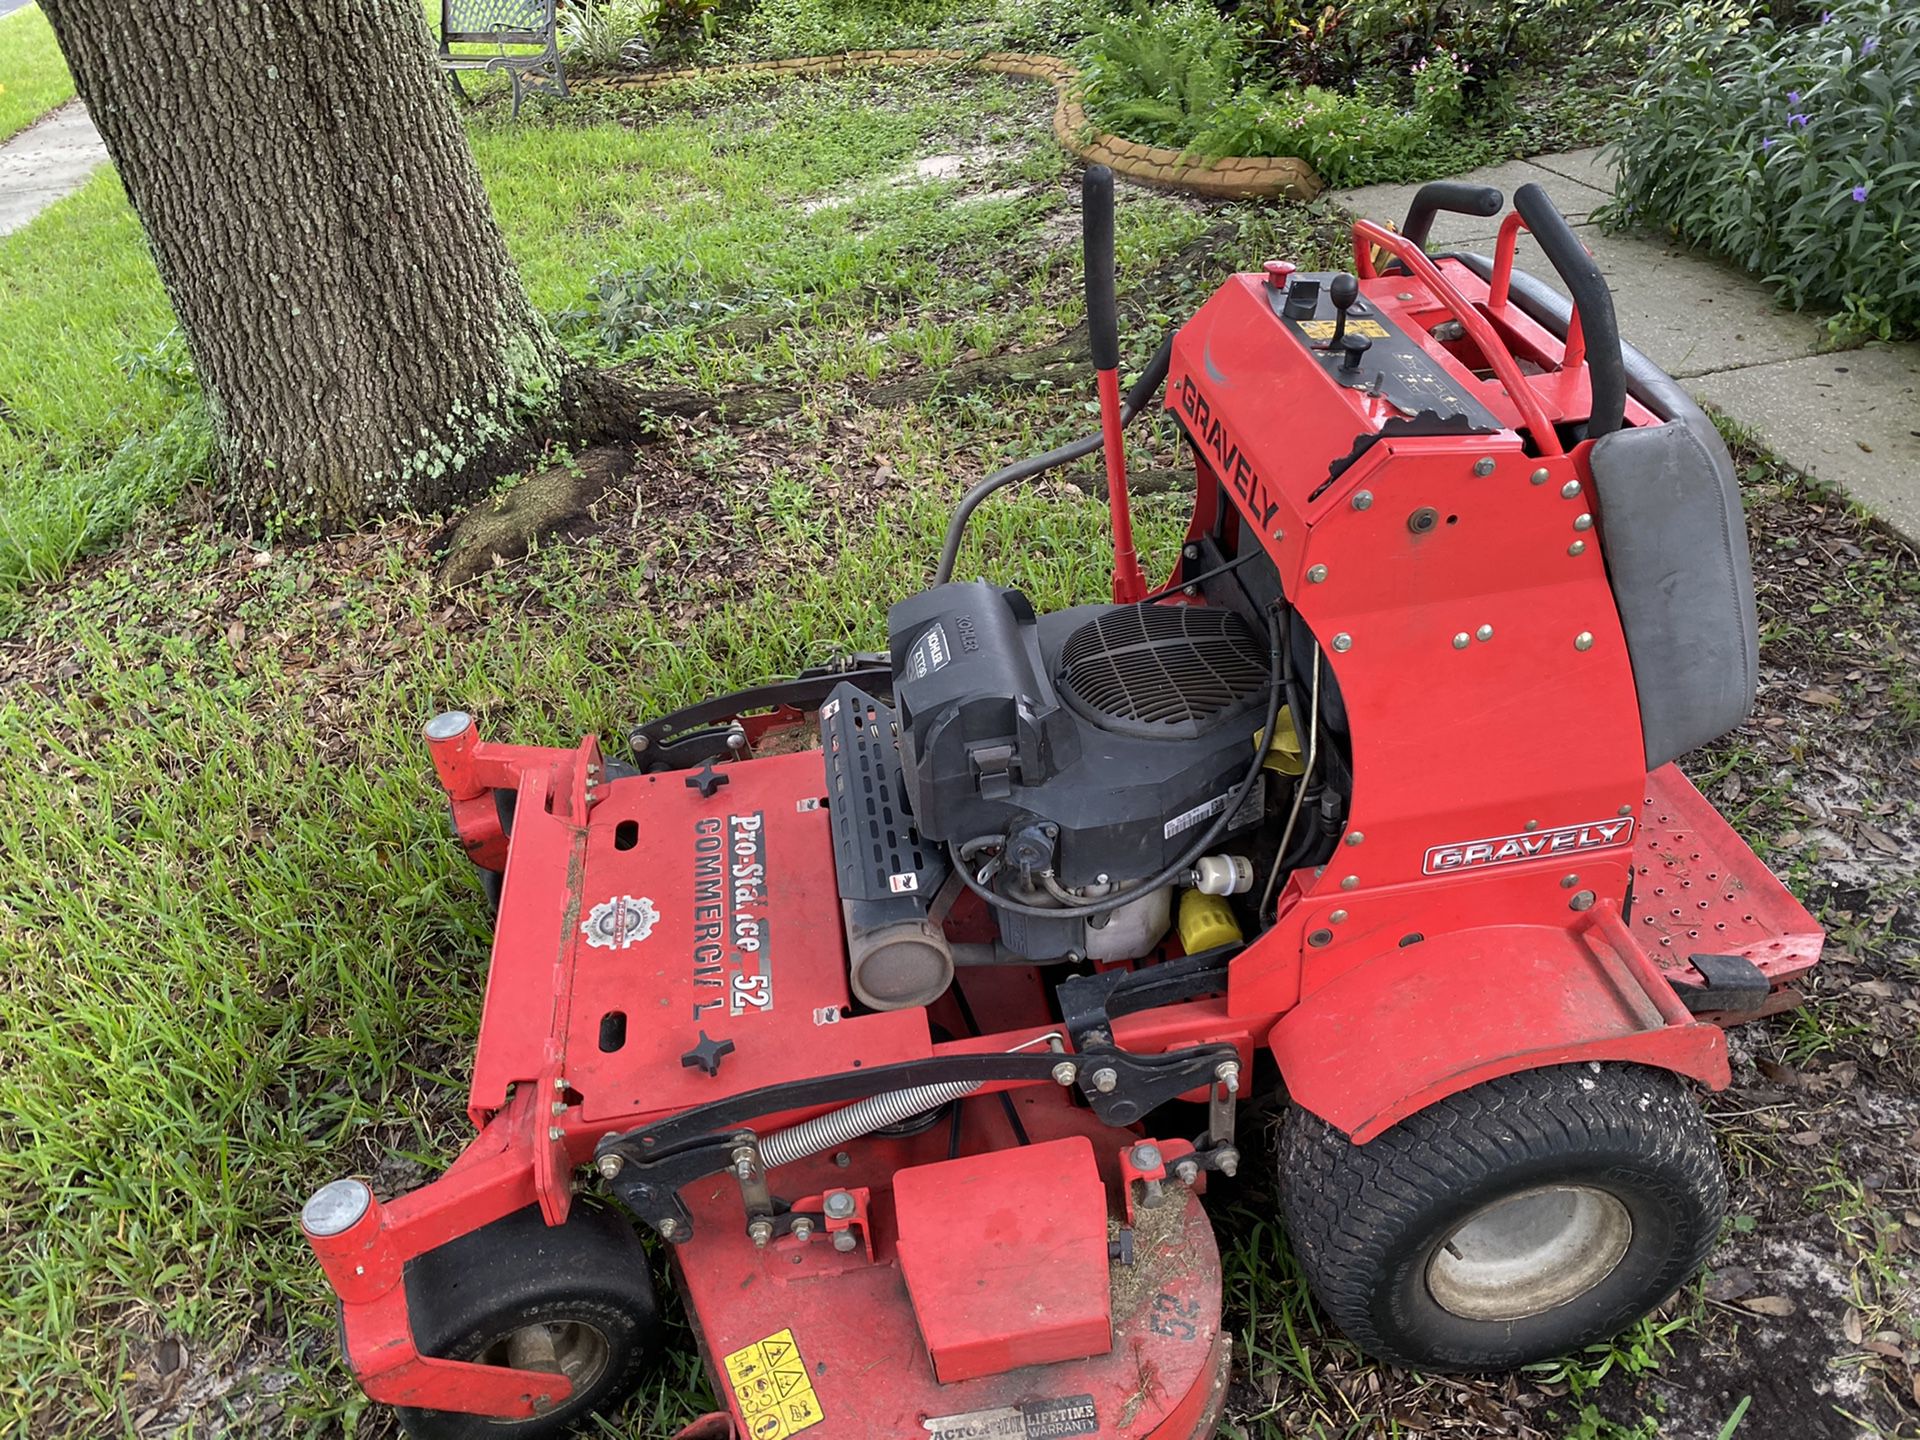 Gravely Pro Stance 52”